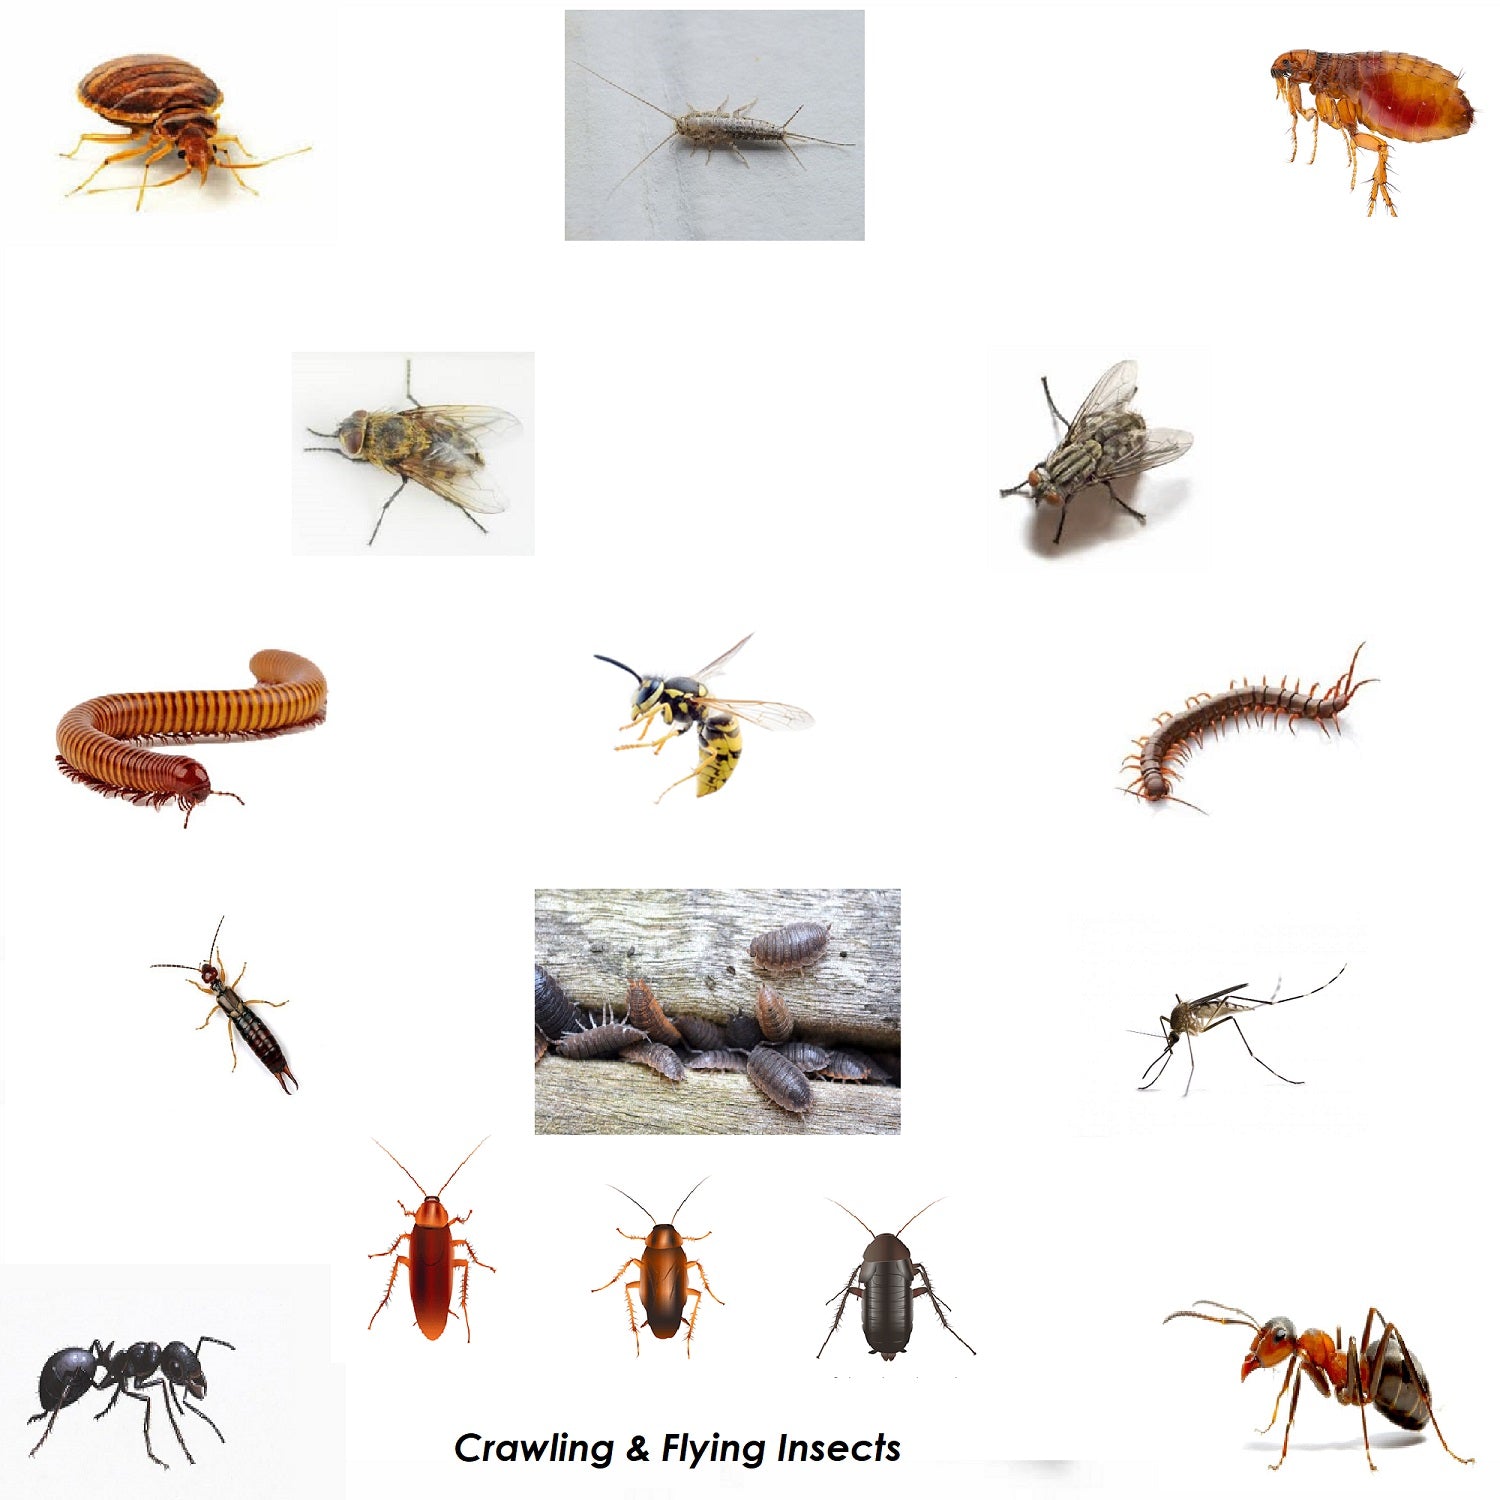 SMOKE INSECT PEST CONTROL BOMB COCKROACH ANT MOTH FLEA BED BUG FLY WASP KILLER (Pack of 3) - Moth Control